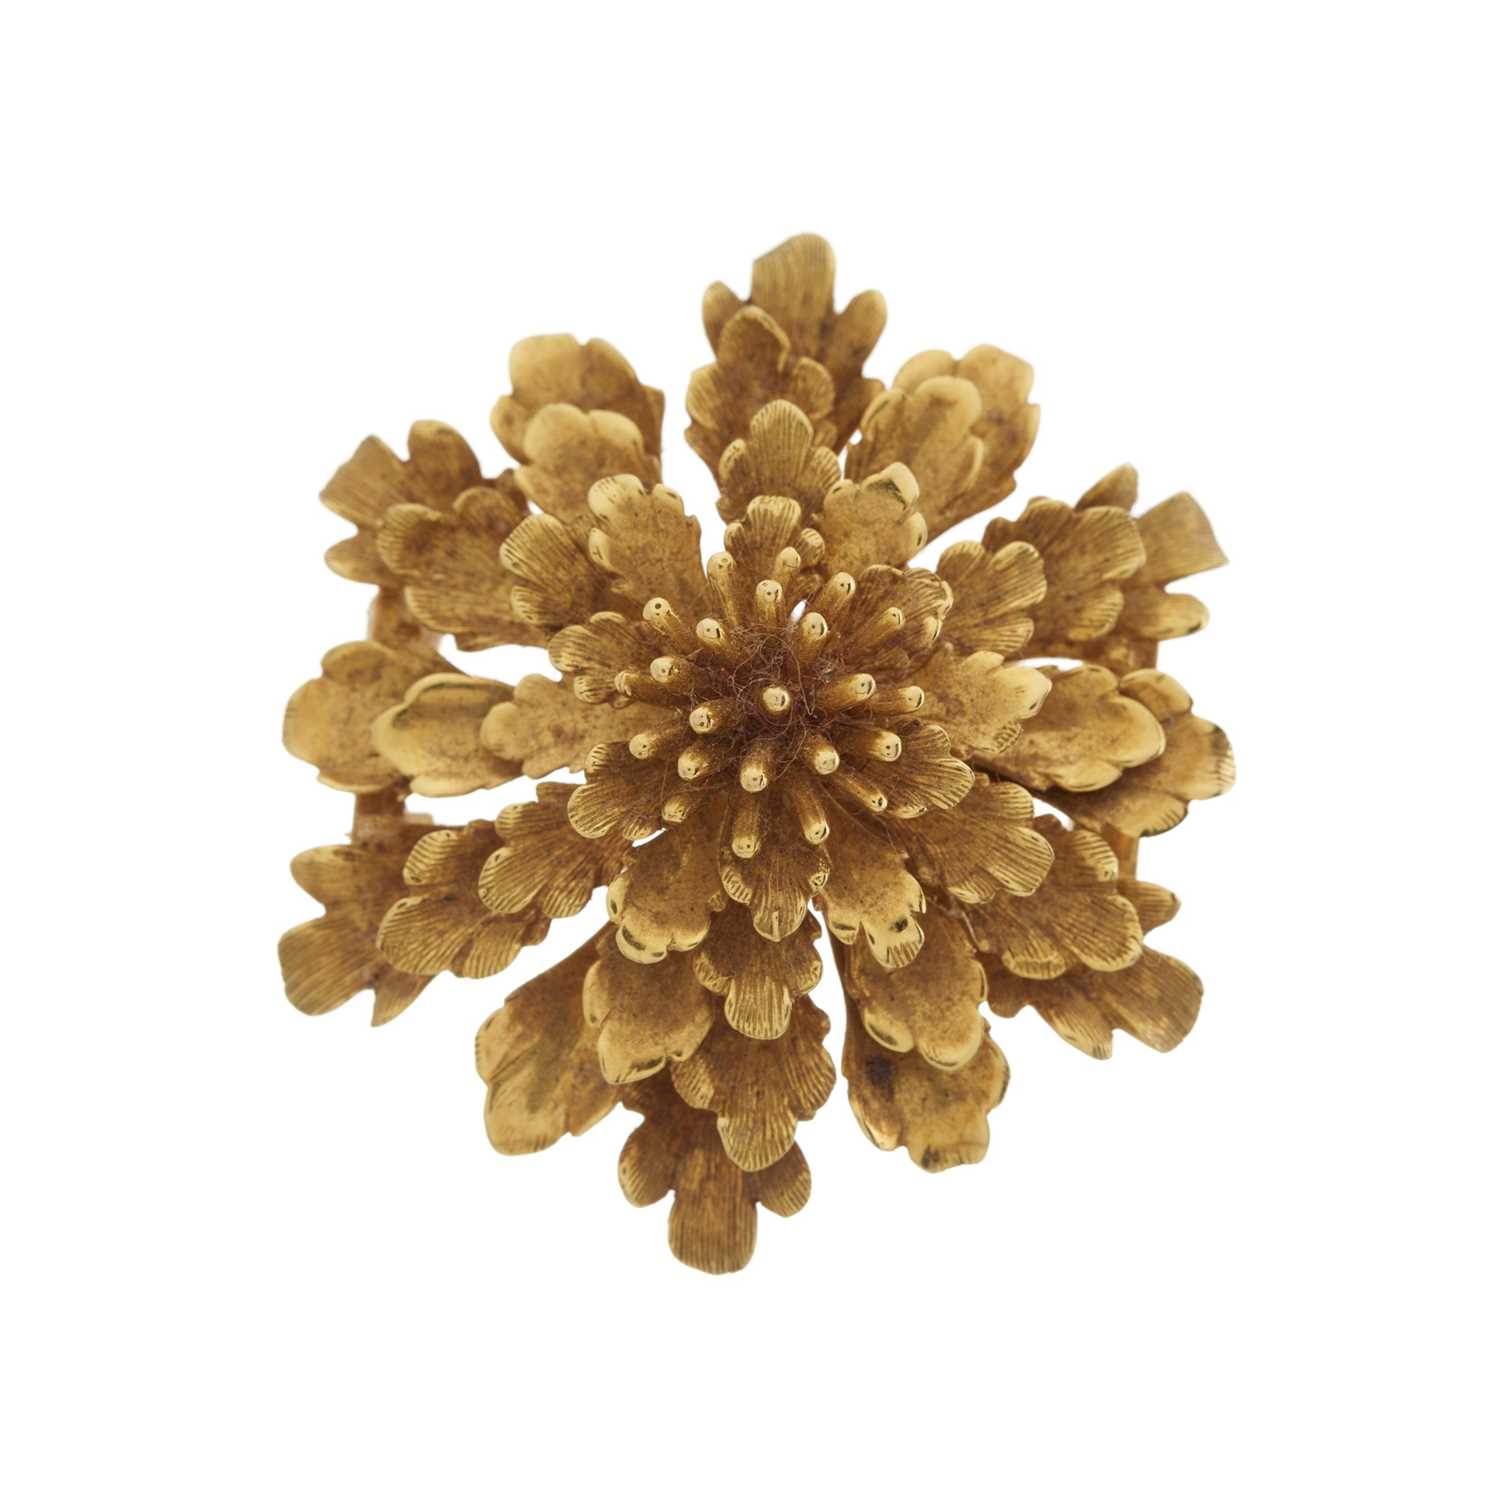 Cartier, a mid 20th century 18ct gold flower brooch